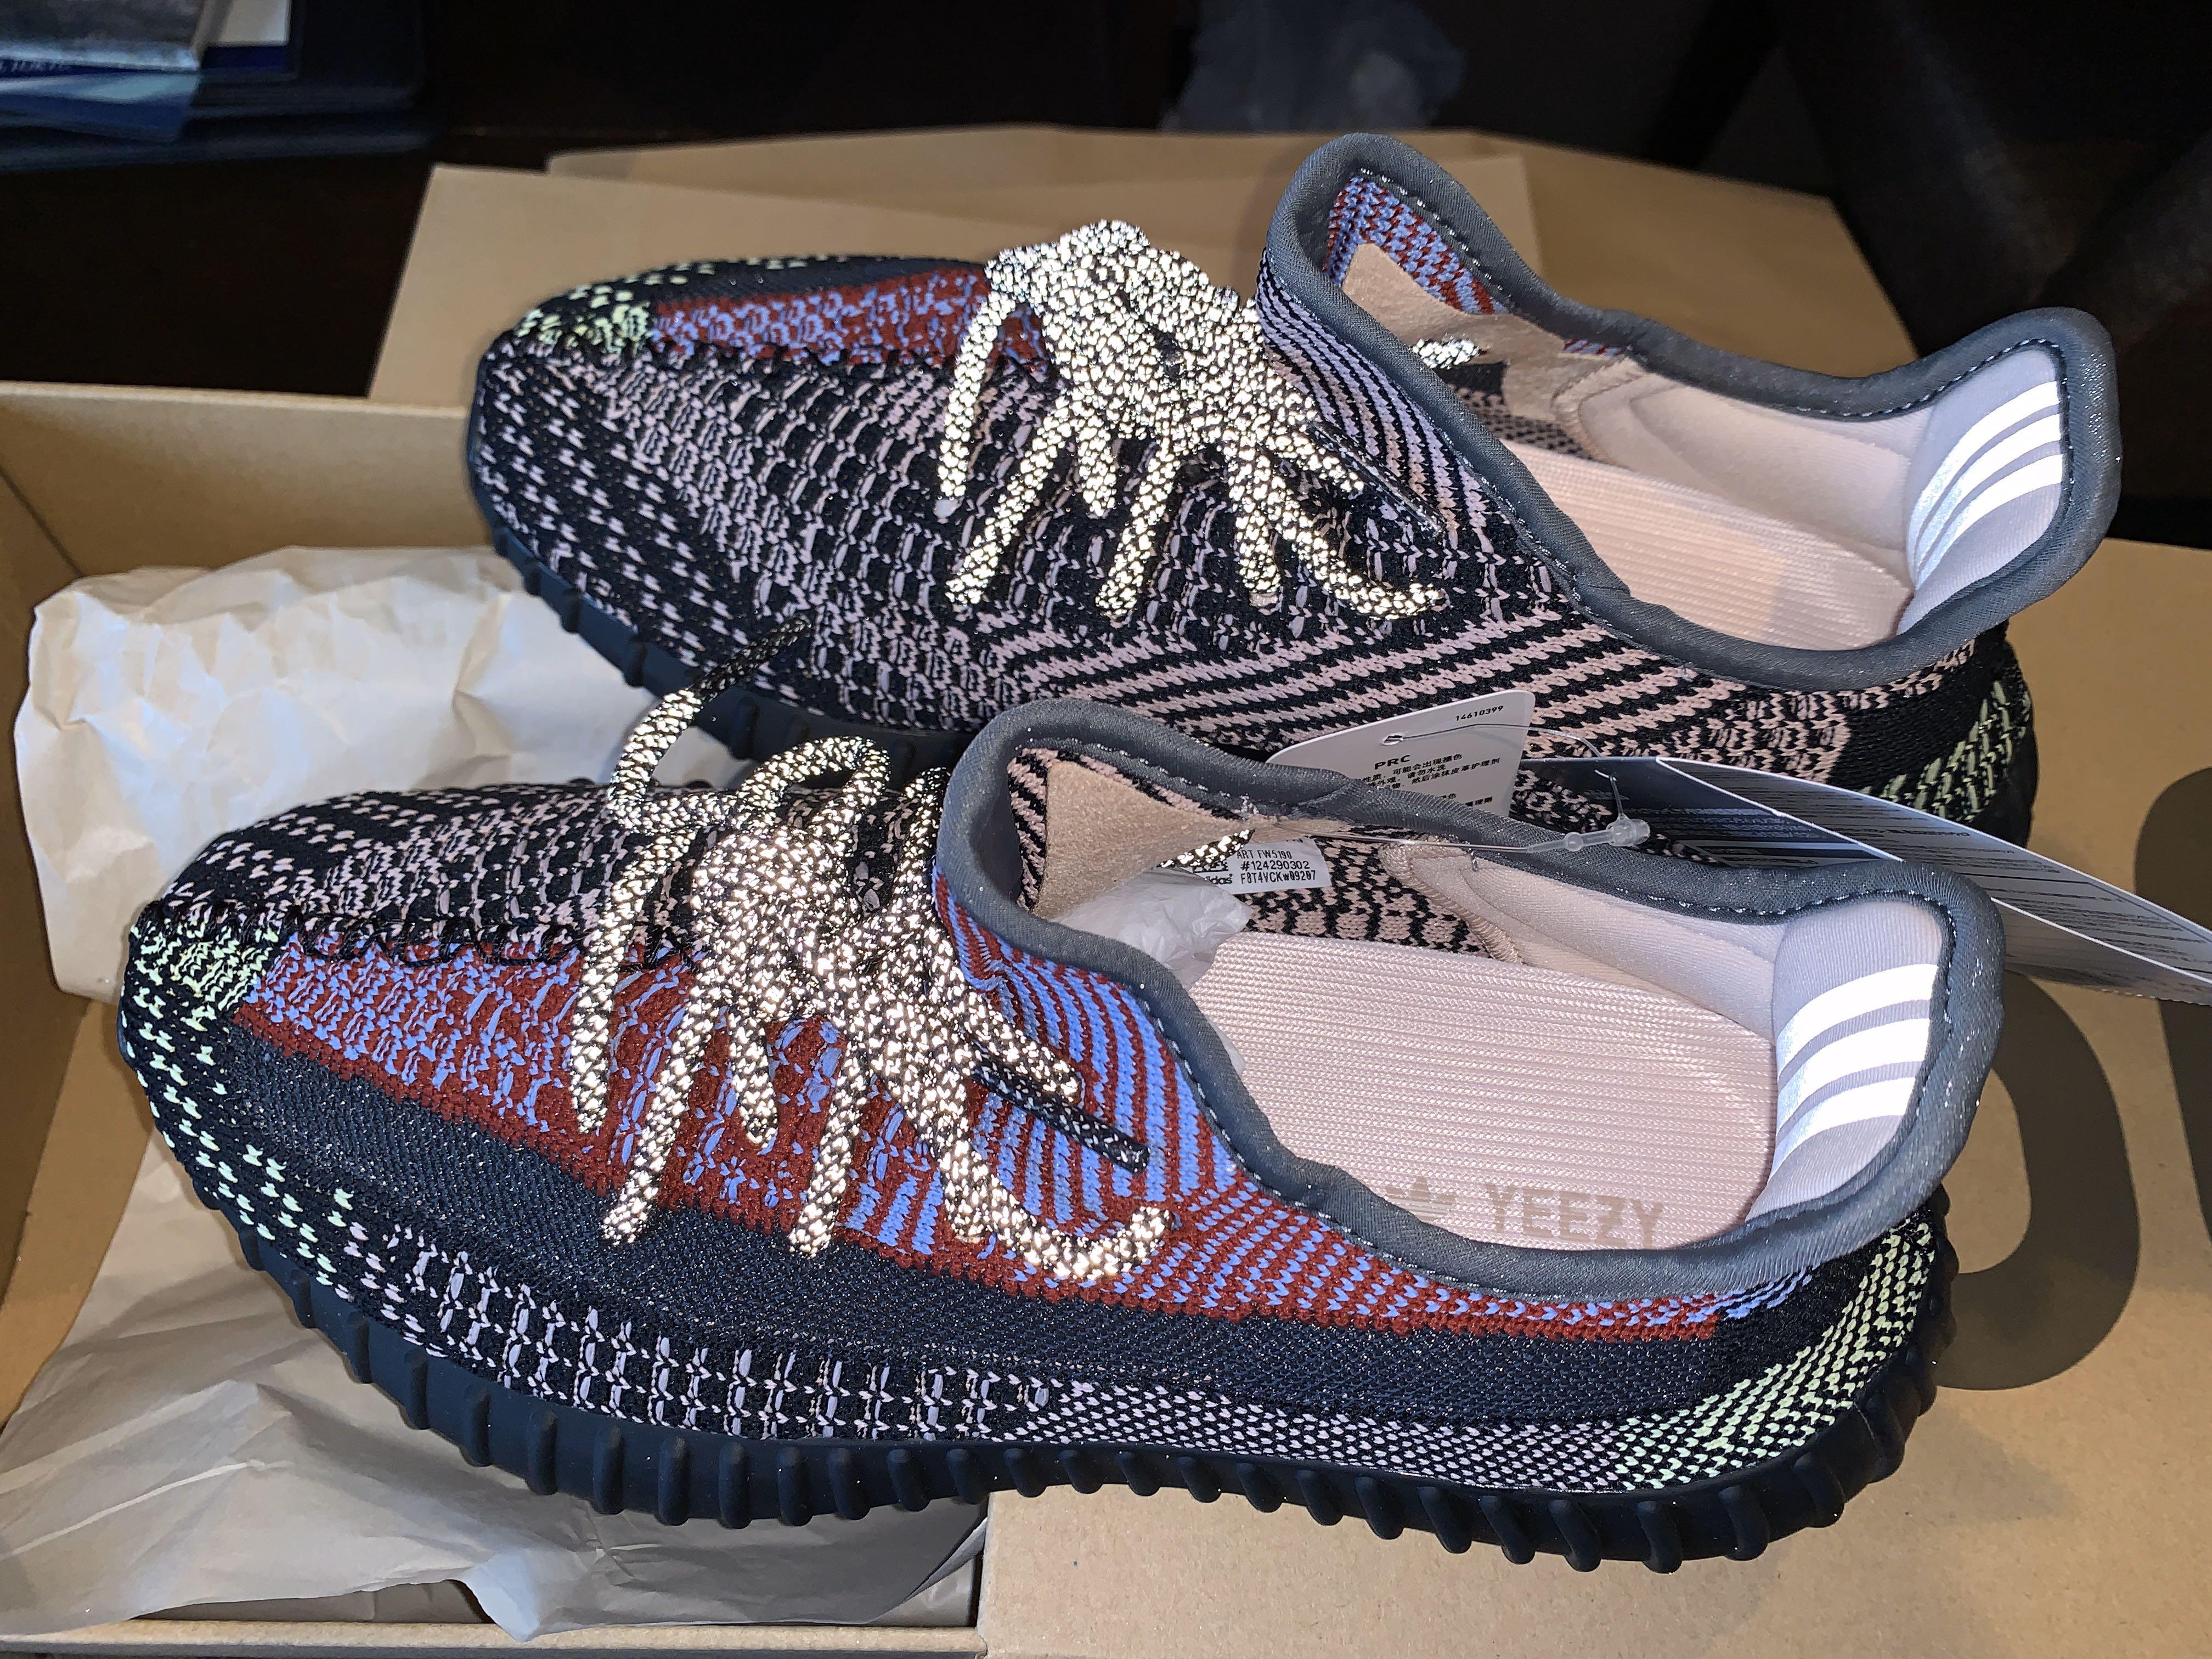 From Tokyo Adidas Yeezy Boost 350 V2 Yecheil from Japan Adidas - Size US 7  / UK 6.5, Men's Fashion, Footwear, Sneakers on Carousell